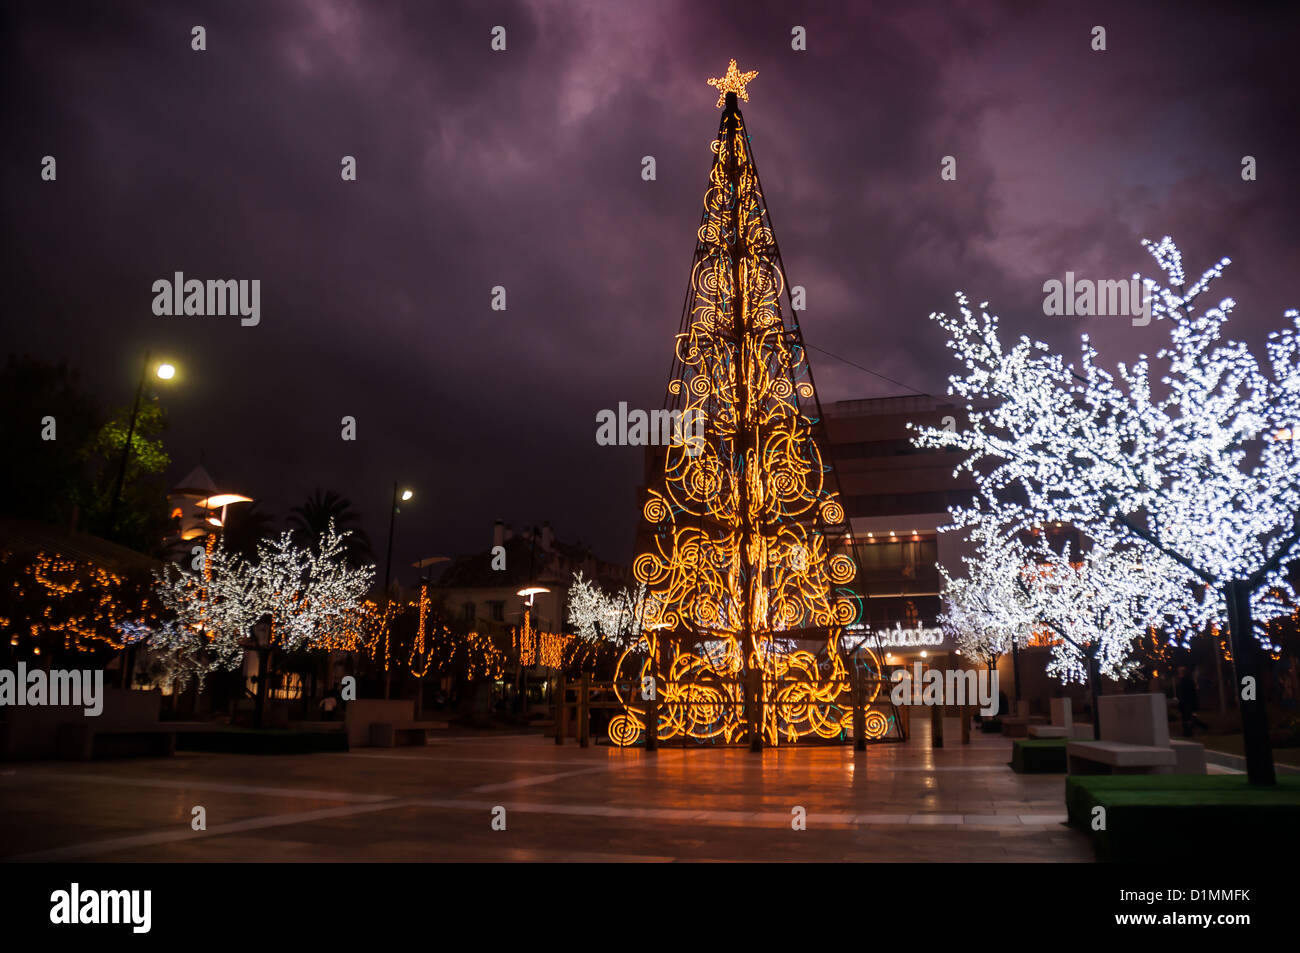 An illuminated modern Christmas tree in the town square Stock Photo